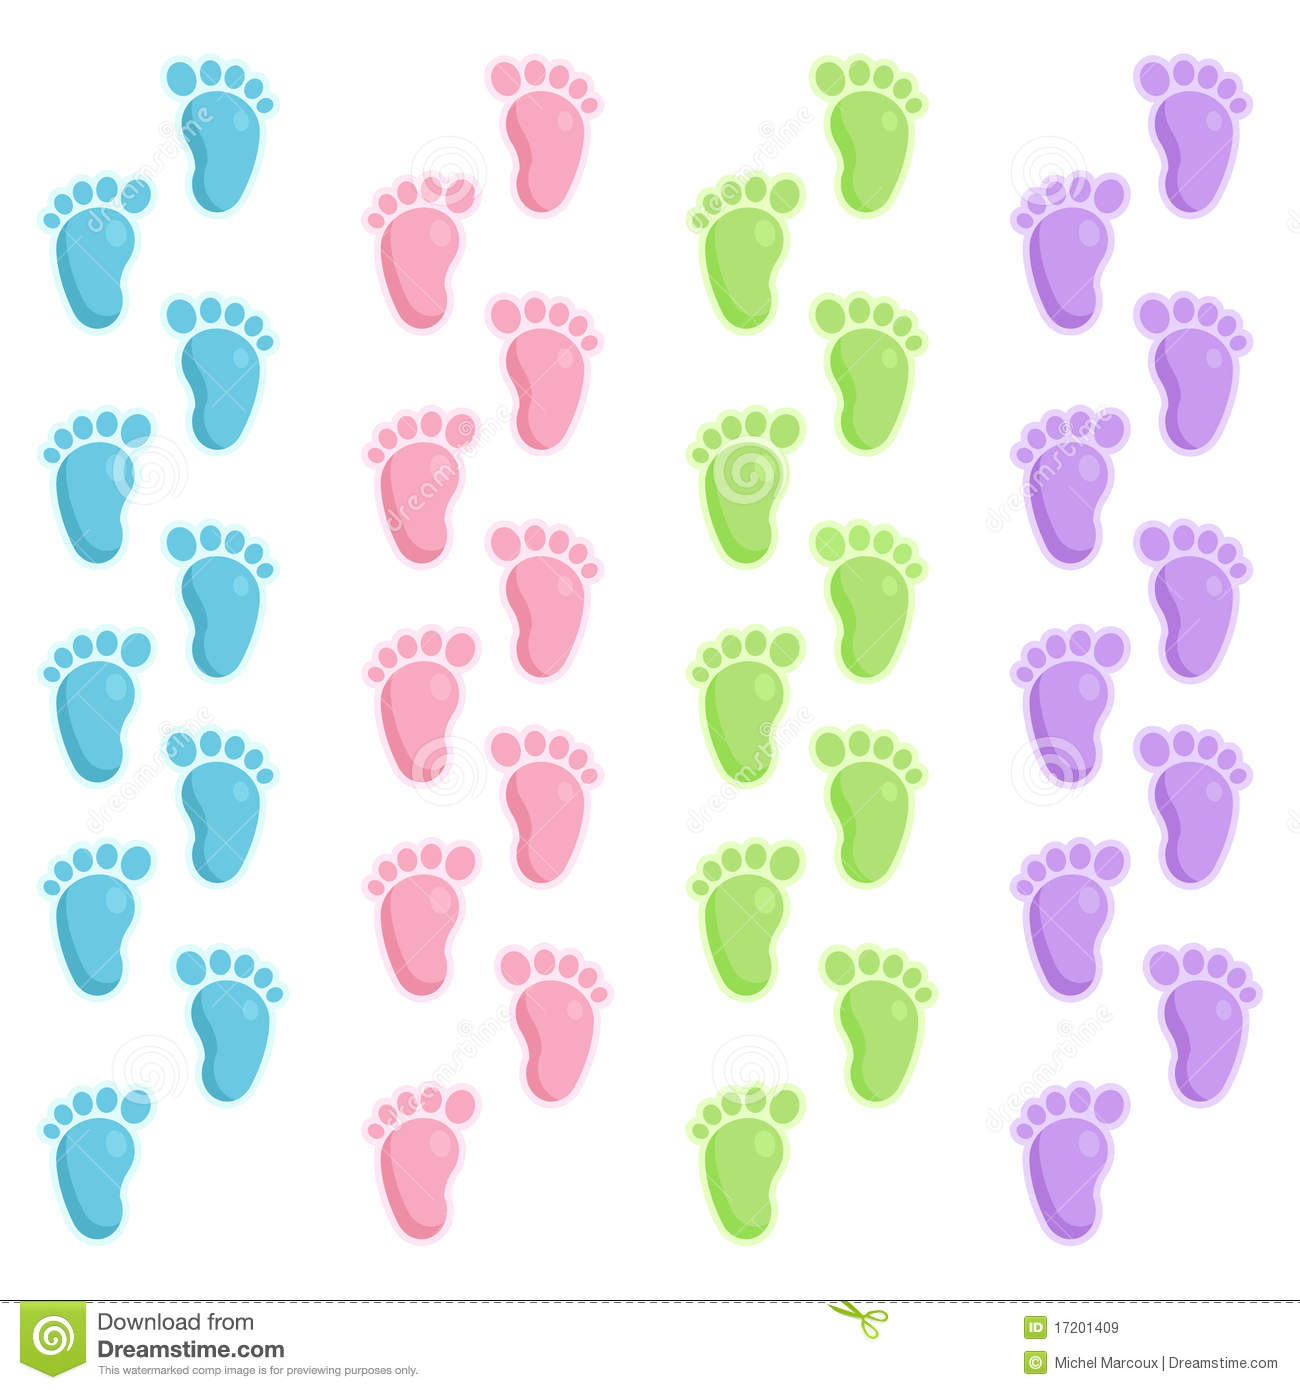 Cute Baby Foot Prints Royalty Free Stock Images   Image  17201409